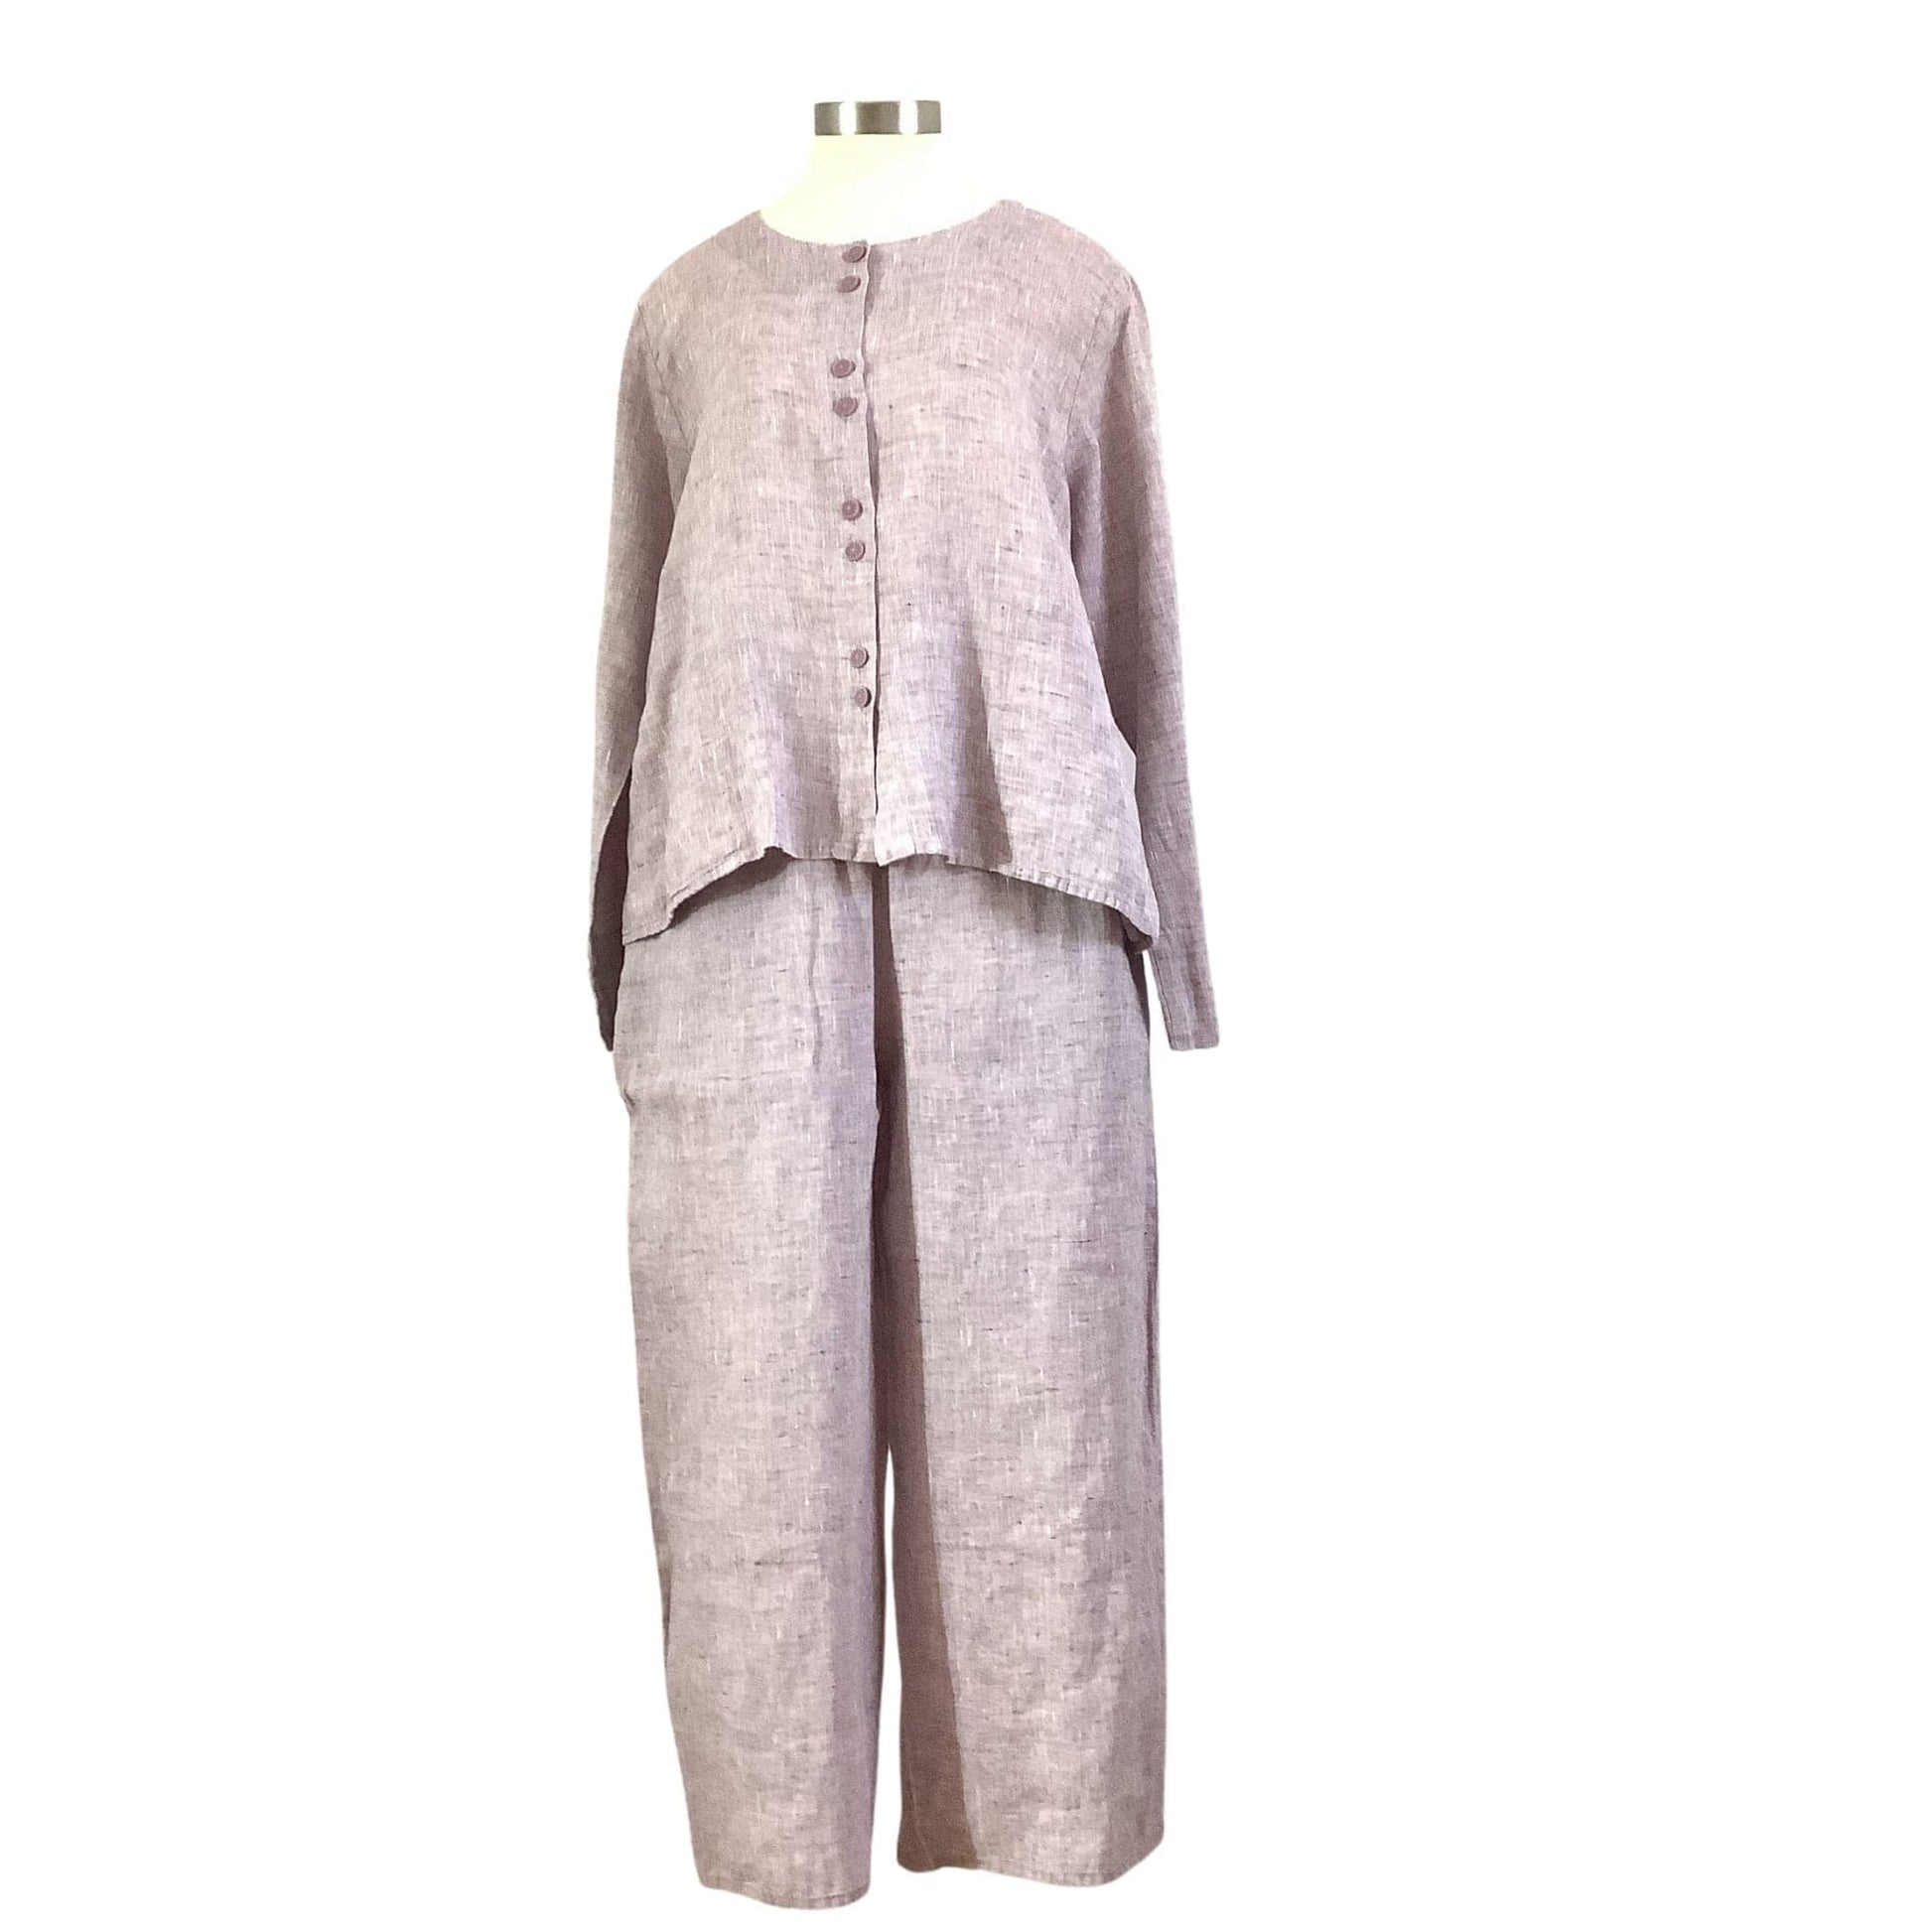 1980s Vintage Flax Outfit